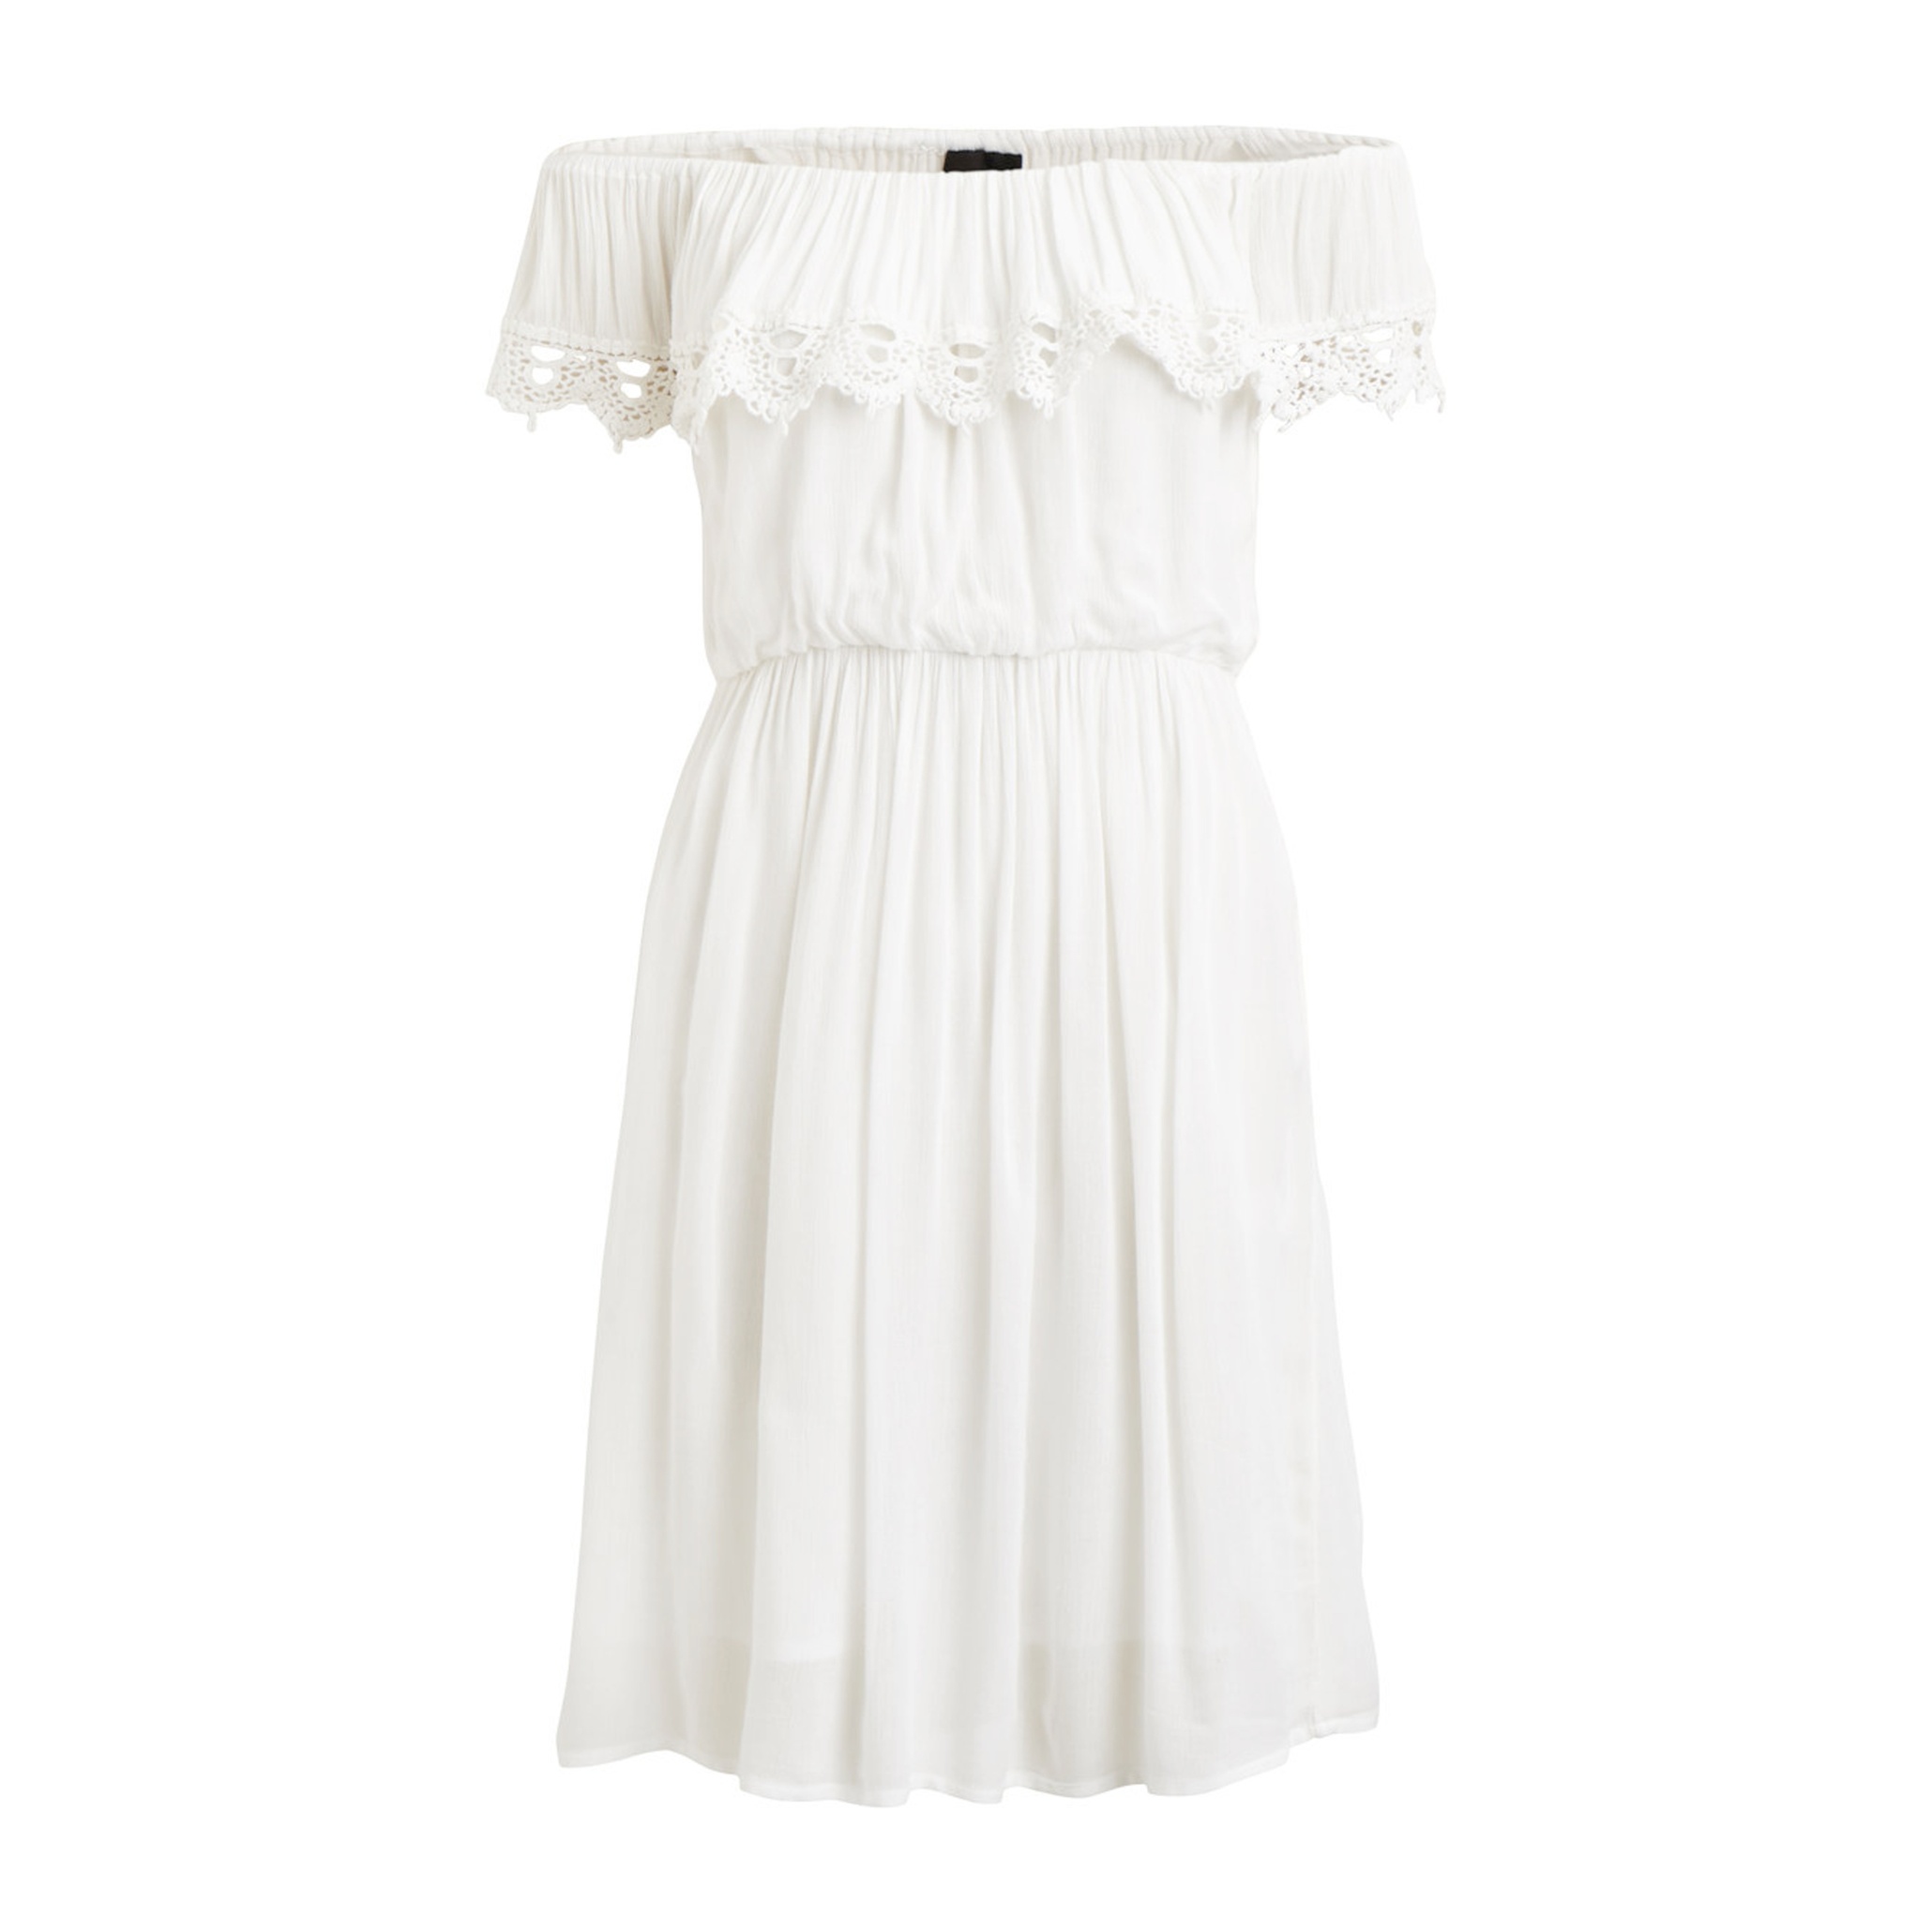 50 stylish summer dresses for 2015 – in pictures | Fashion | The Guardian